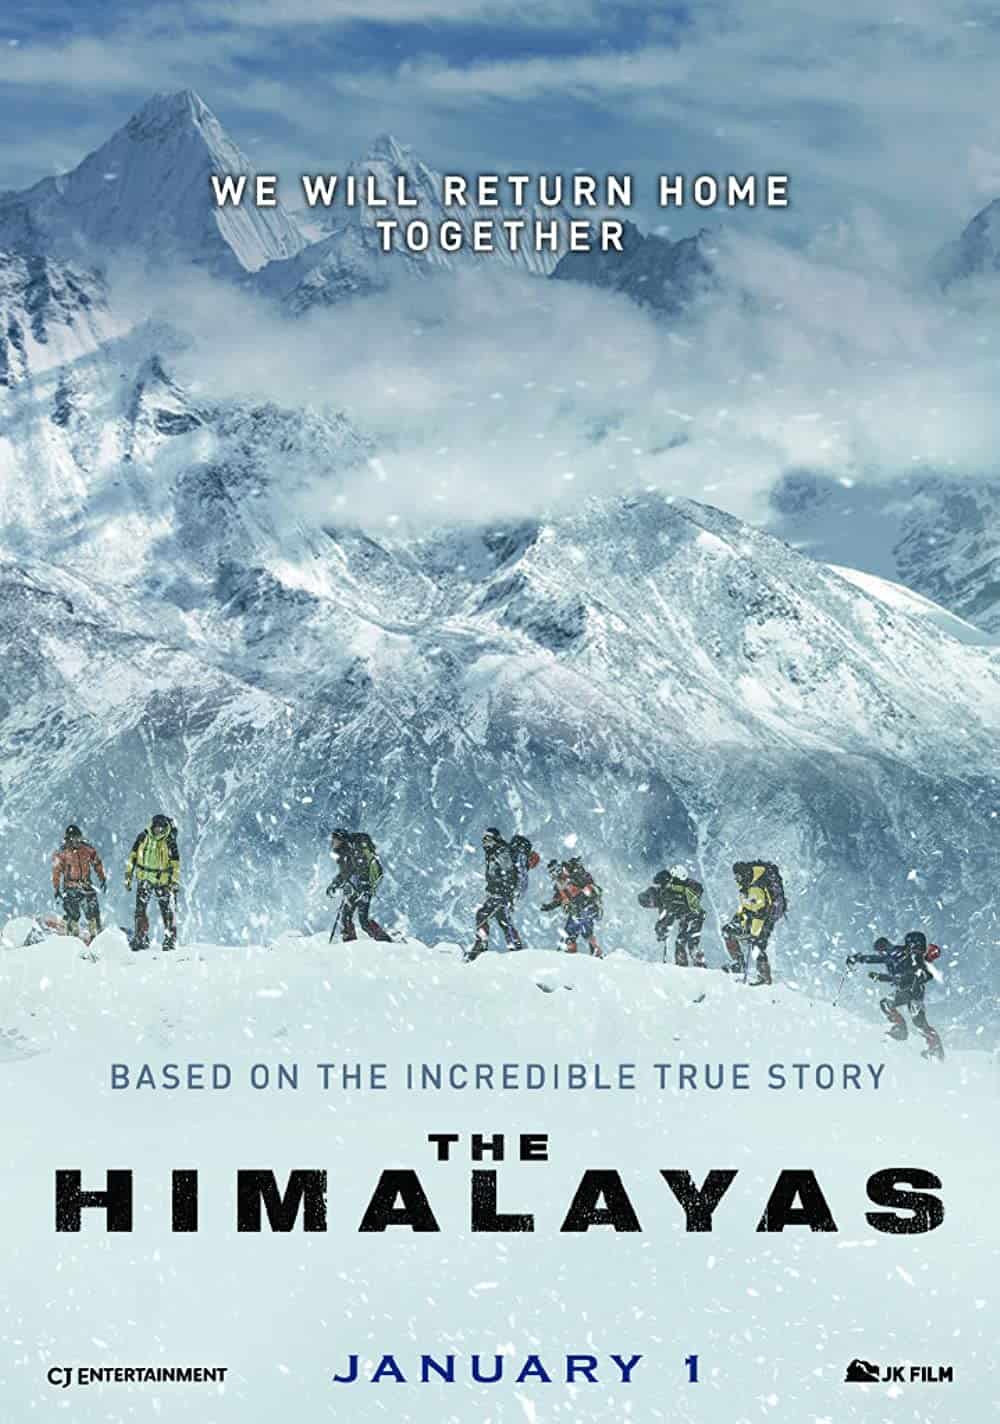 The Himalayas (2015) Best Mountaineering Movies You Can't Miss